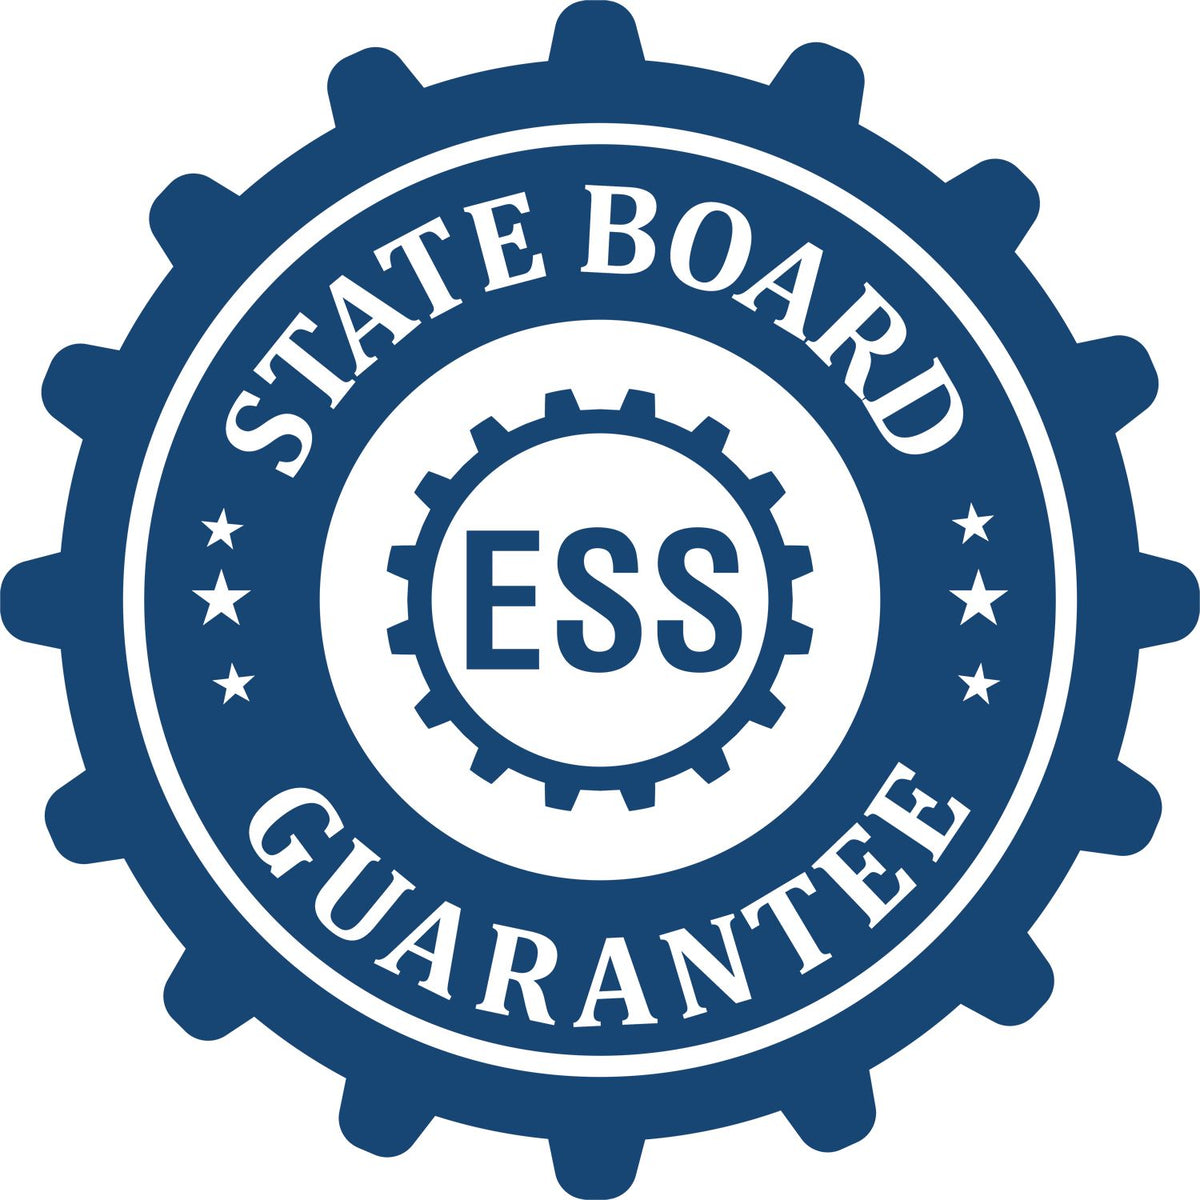 An emblem in a gear shape illustrating a state board guarantee for the Digital Tennessee PE Stamp and Electronic Seal for Tennessee Engineer product.